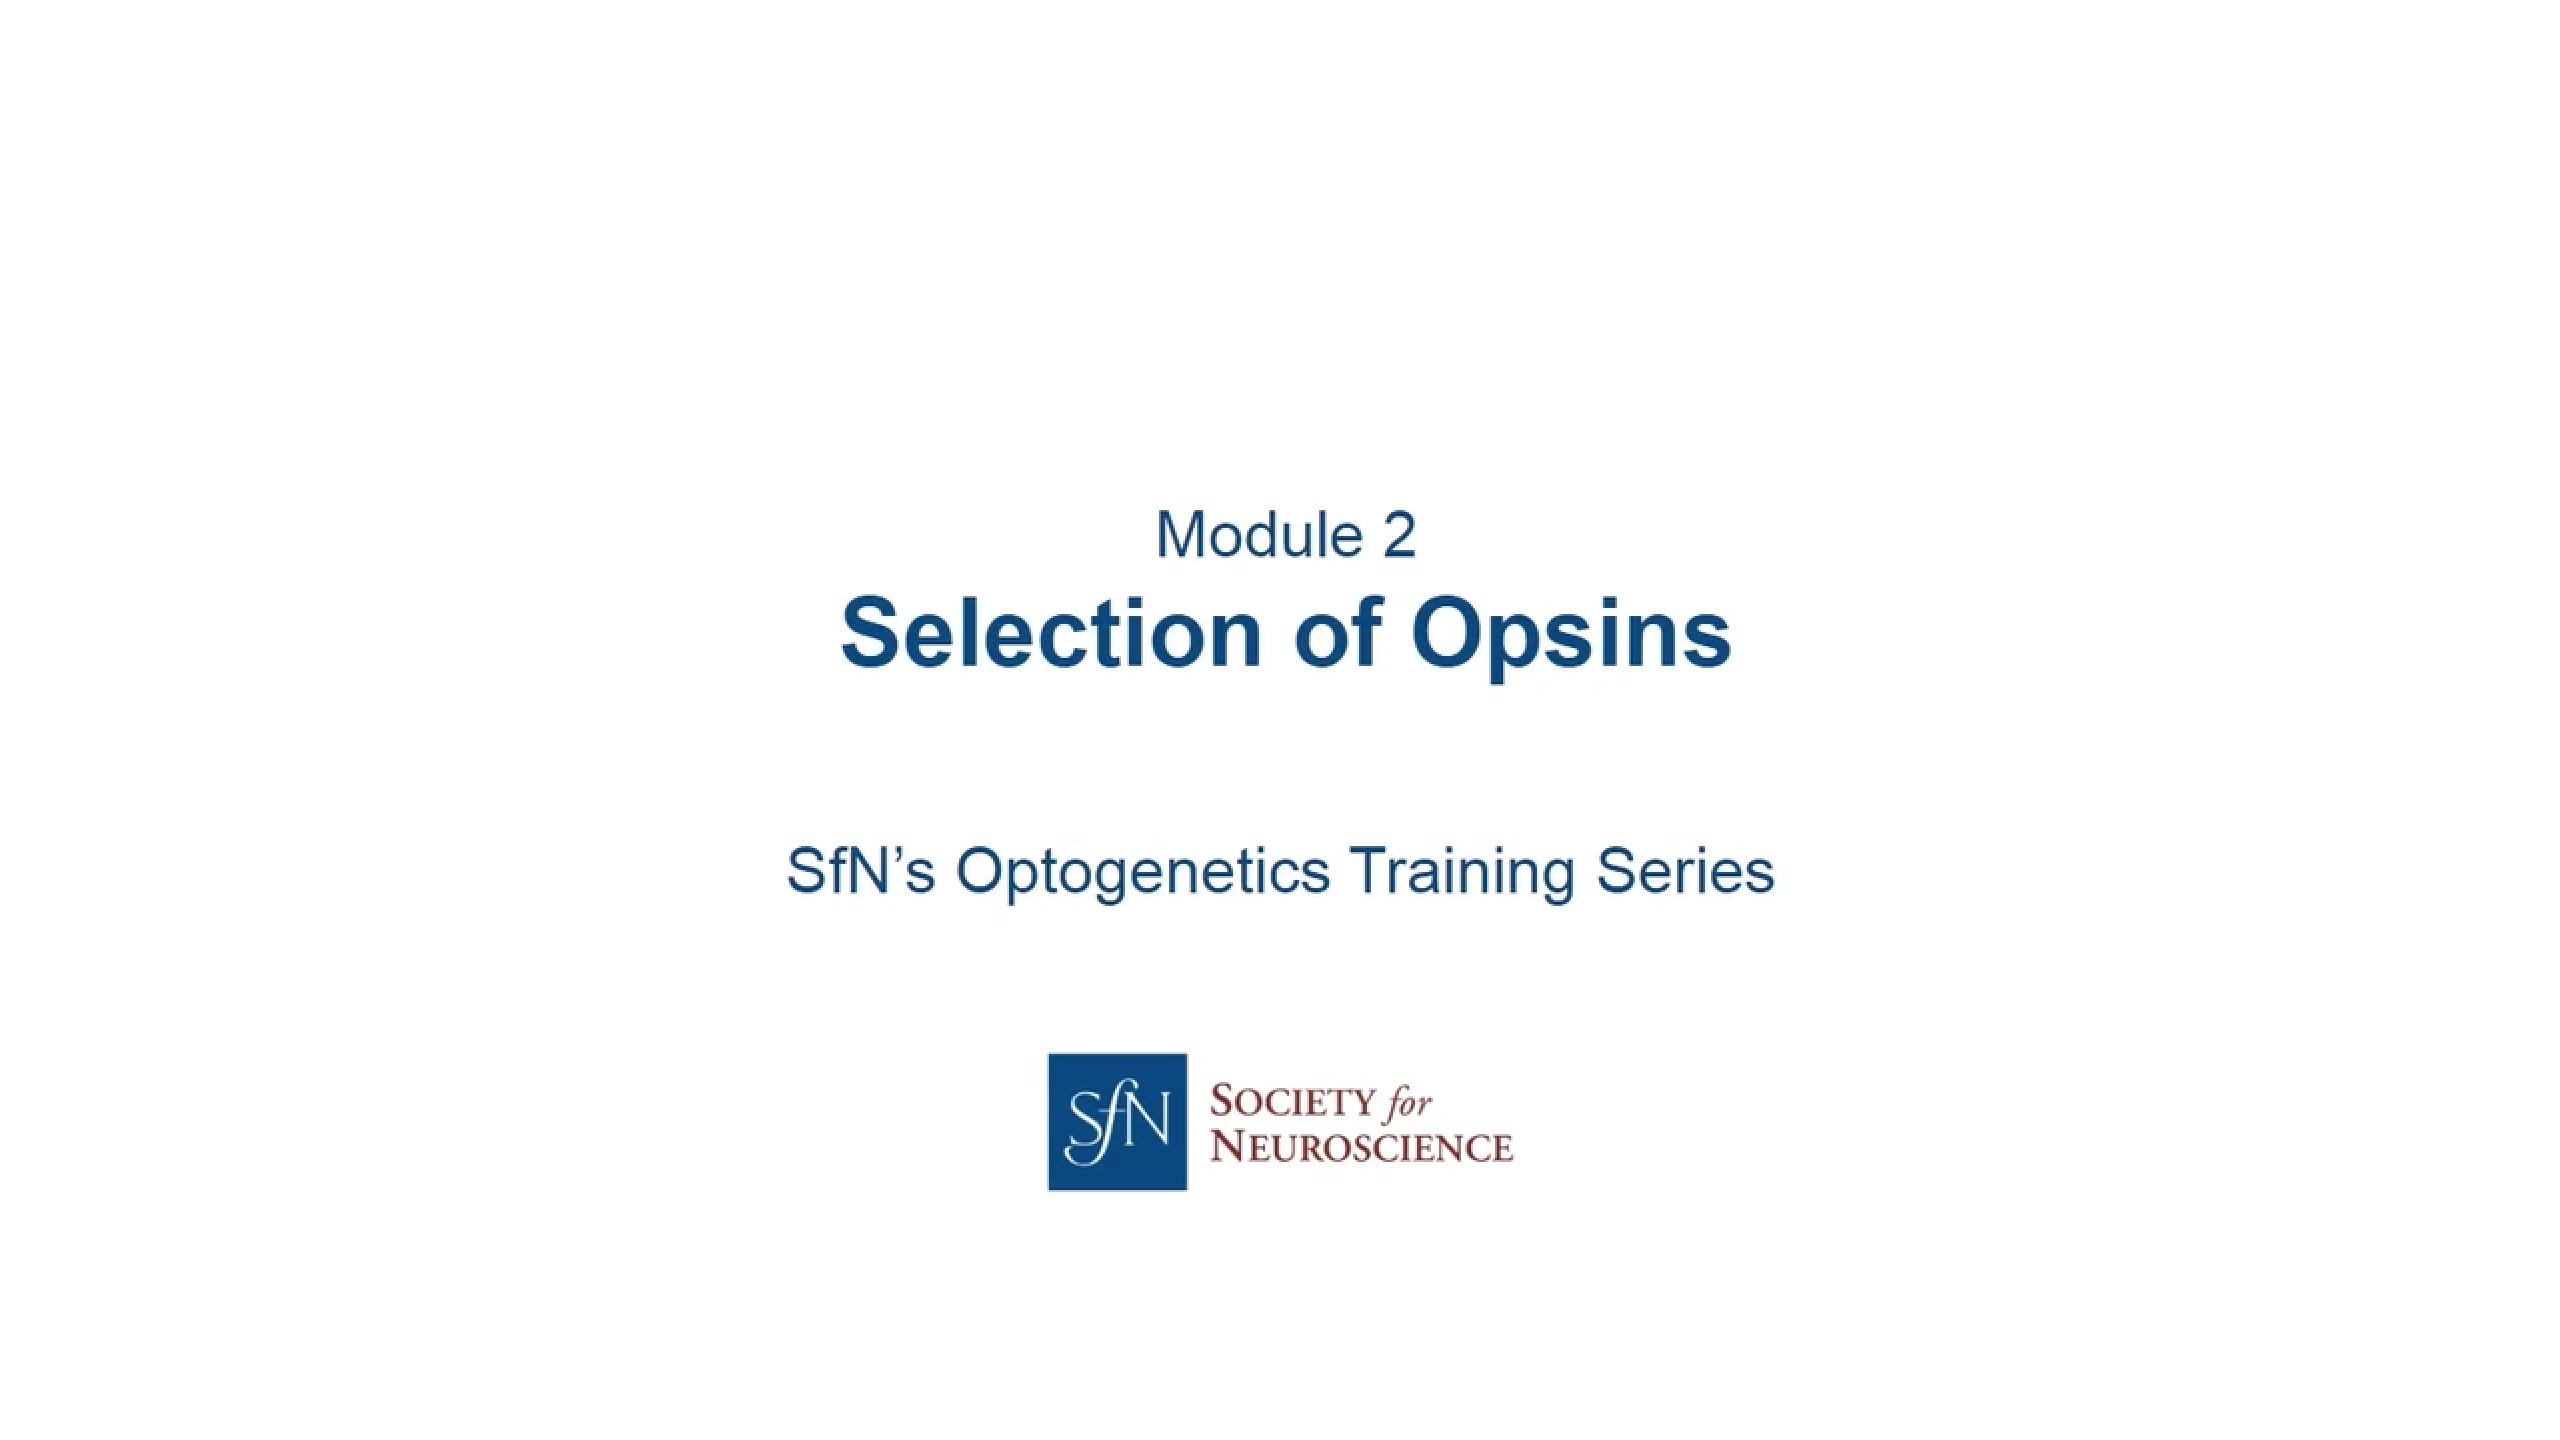 Selection of Opsins title image with SfN logo